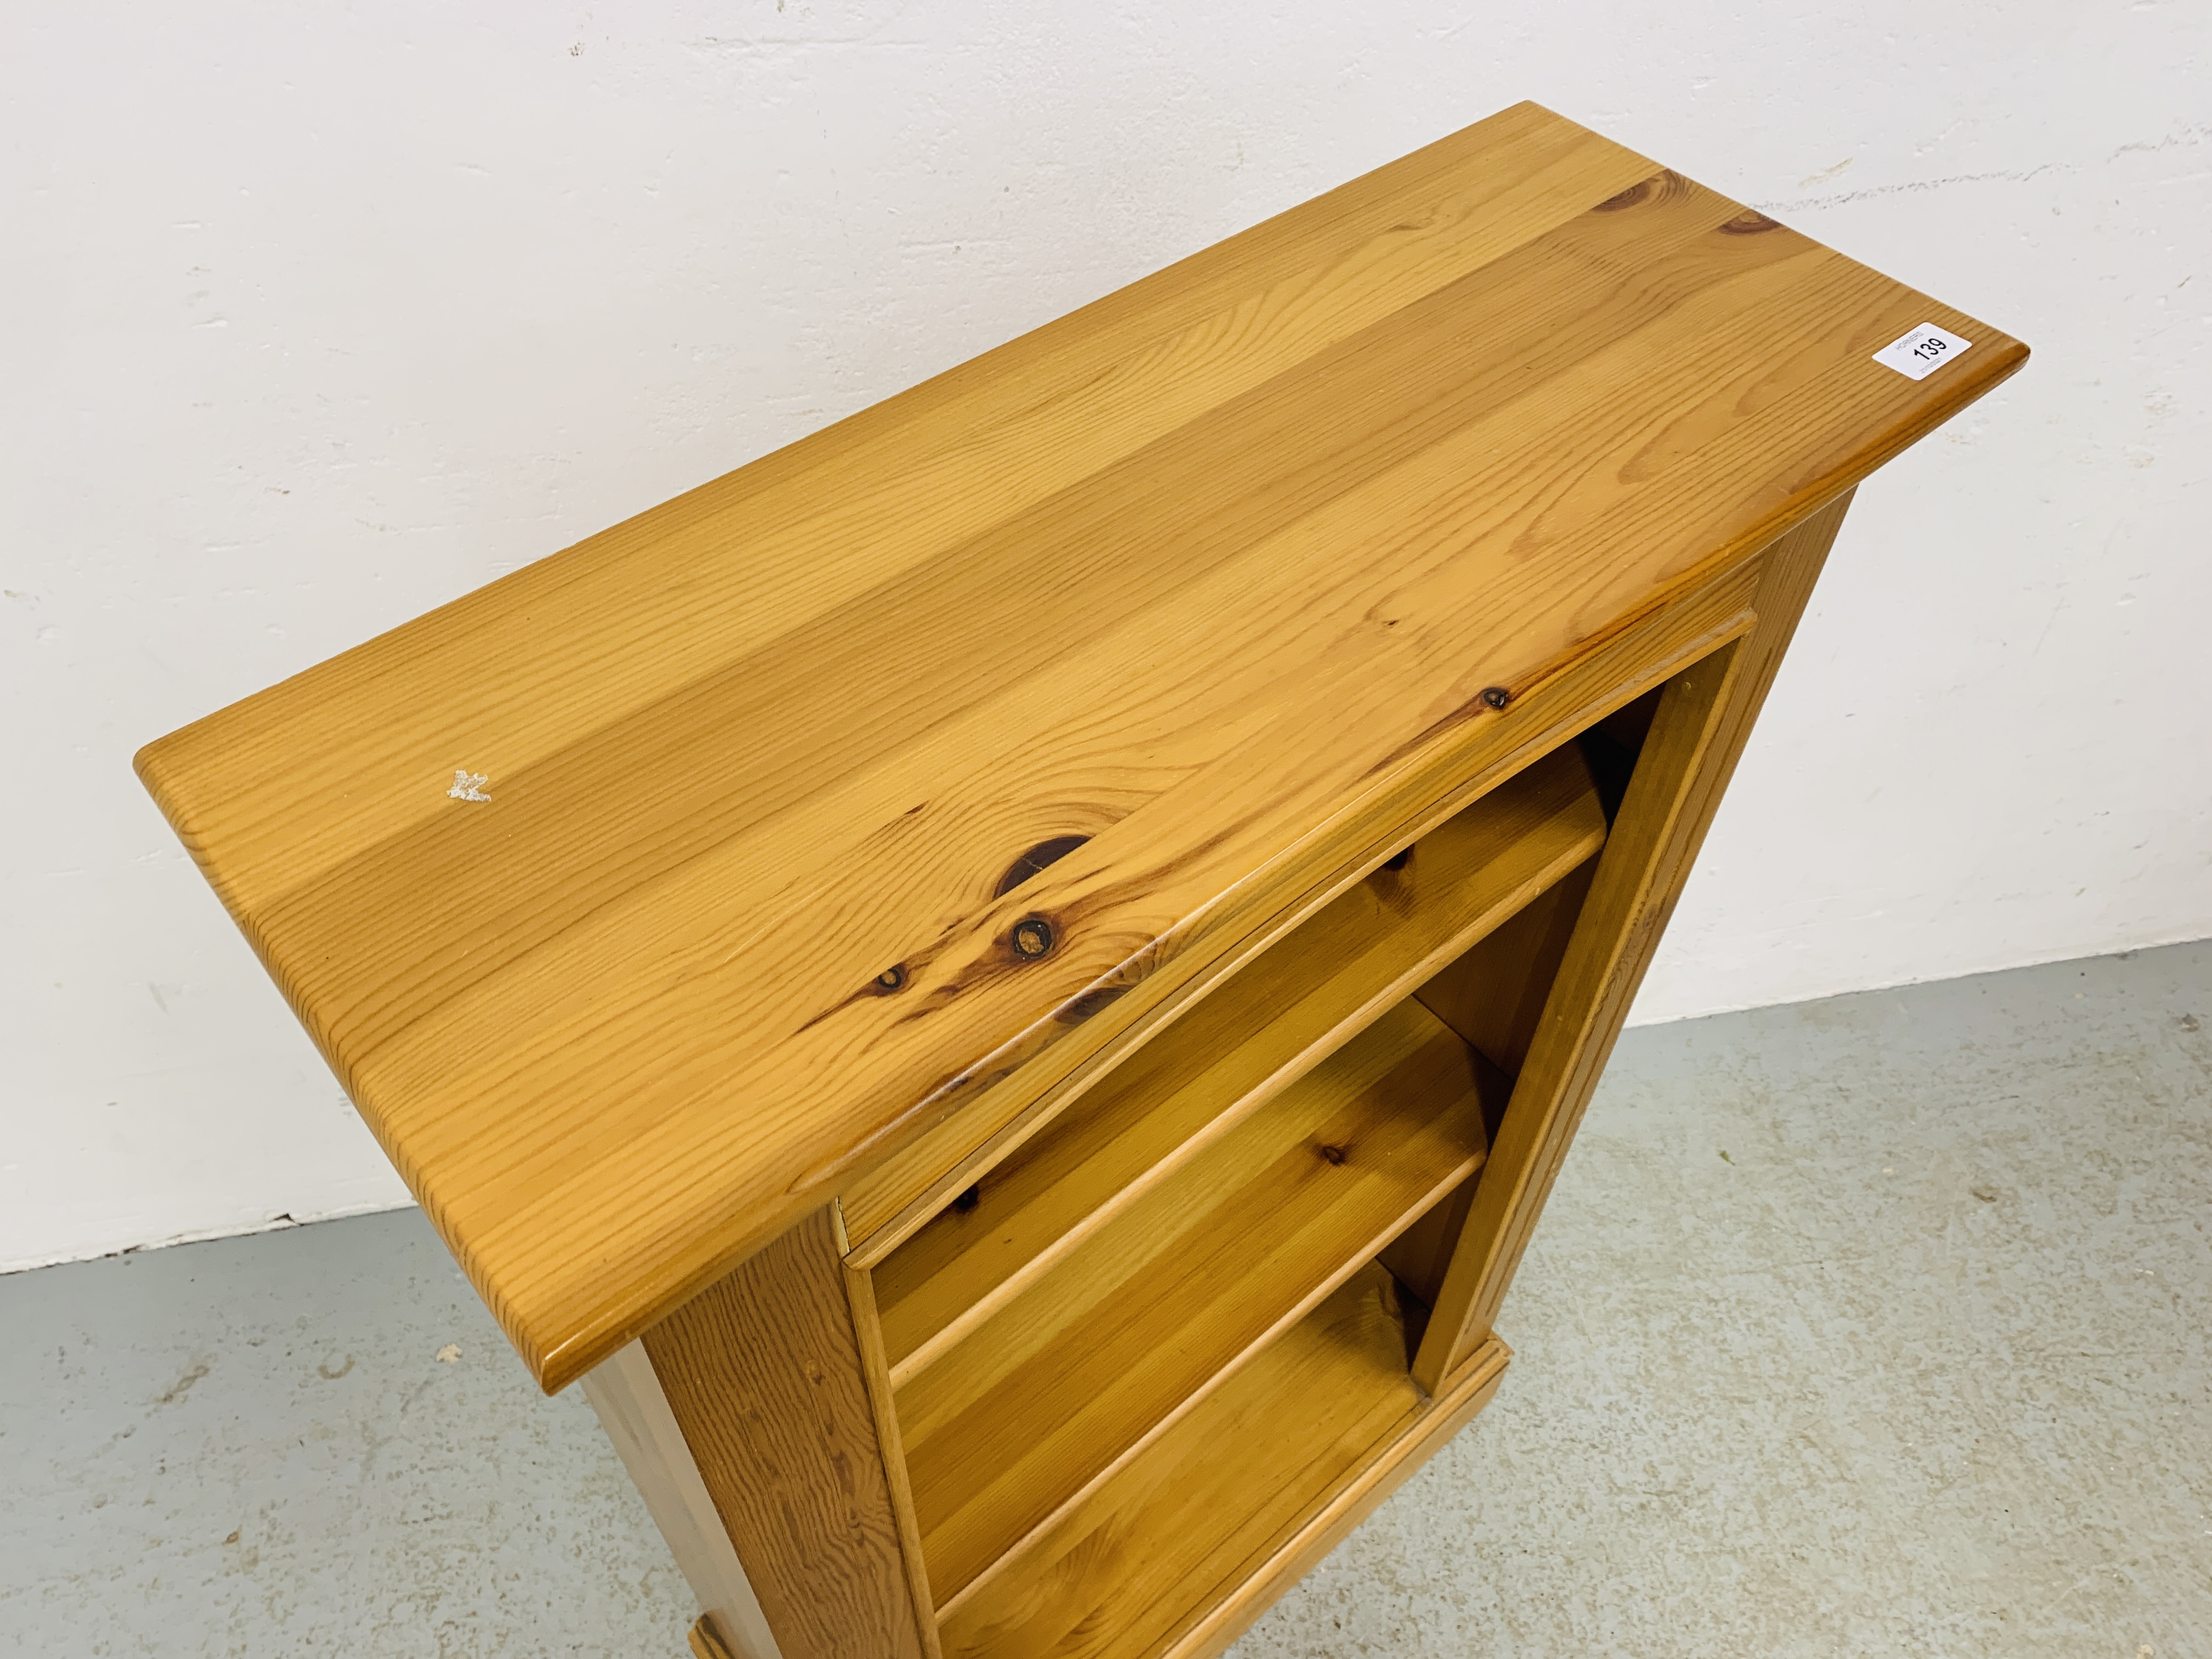 A SOLID HONEY PINE BOOKSHELF WITH TONGUE AND GROOVE BOARDED BACK - W 66CM. D 26CM. H 107CM. - Image 8 of 8